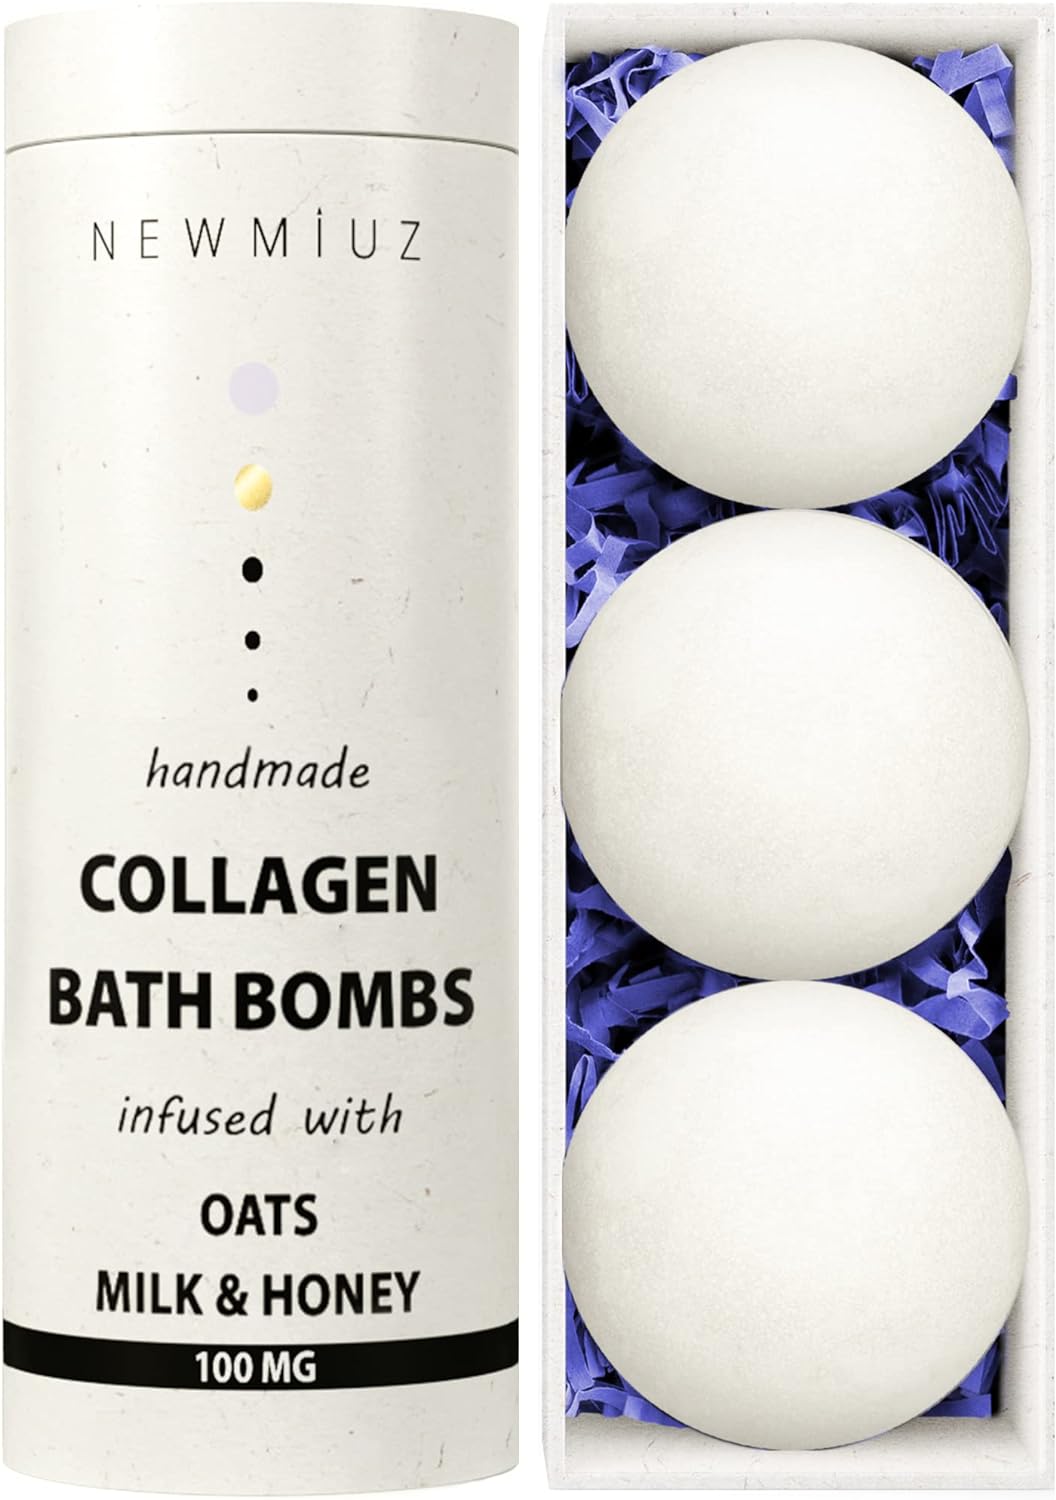 Creamy Collagen Bubble Bath Bombs Infused with Oatmeal Milk & Honey - Essential Luxurious Bath Additives for Dry Skin Nourishment - Indulge in A Blissful Bathing Experience with Our Relaxing Gift Set